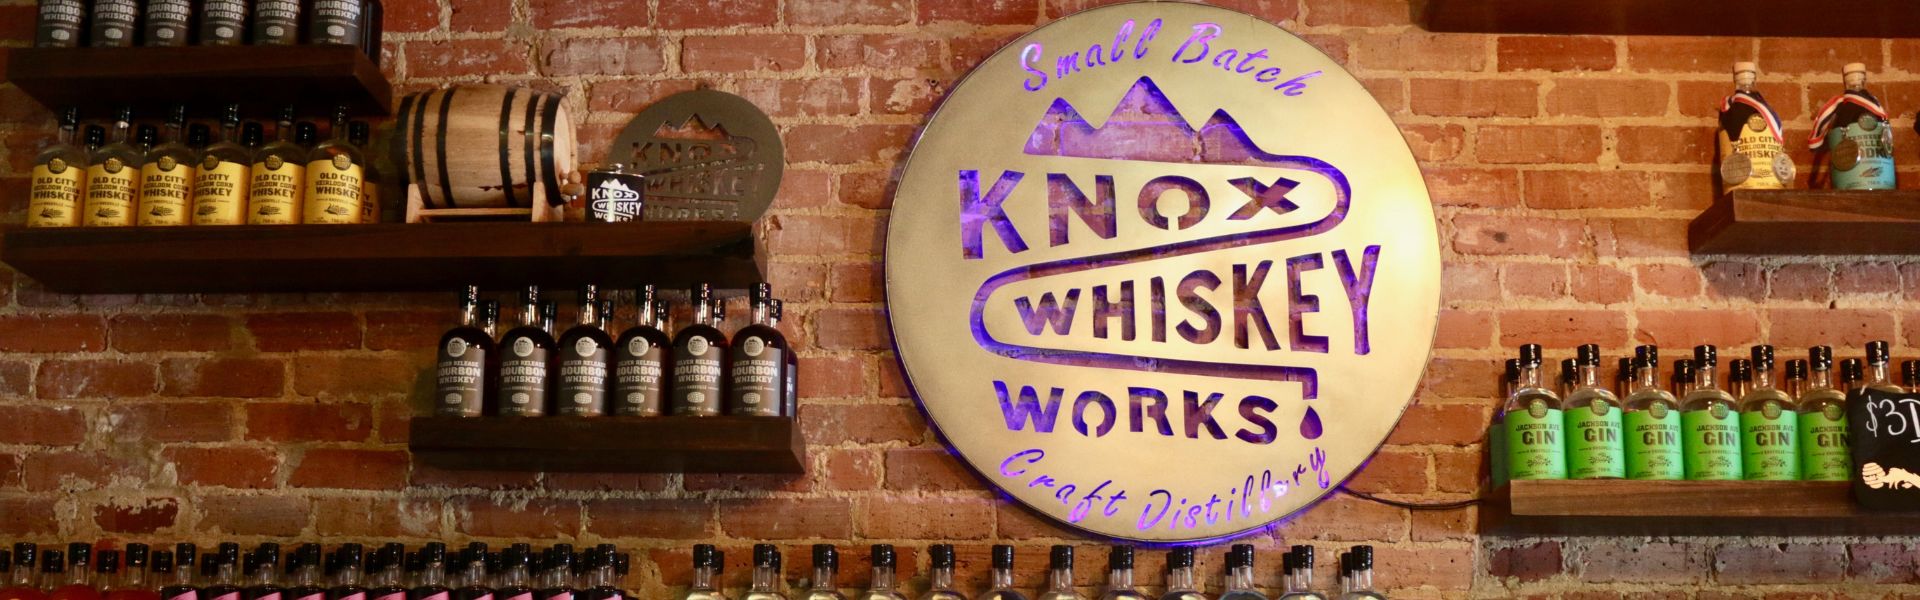 Knox Whiskey Distillery Tennessee Tourism 02Dec22